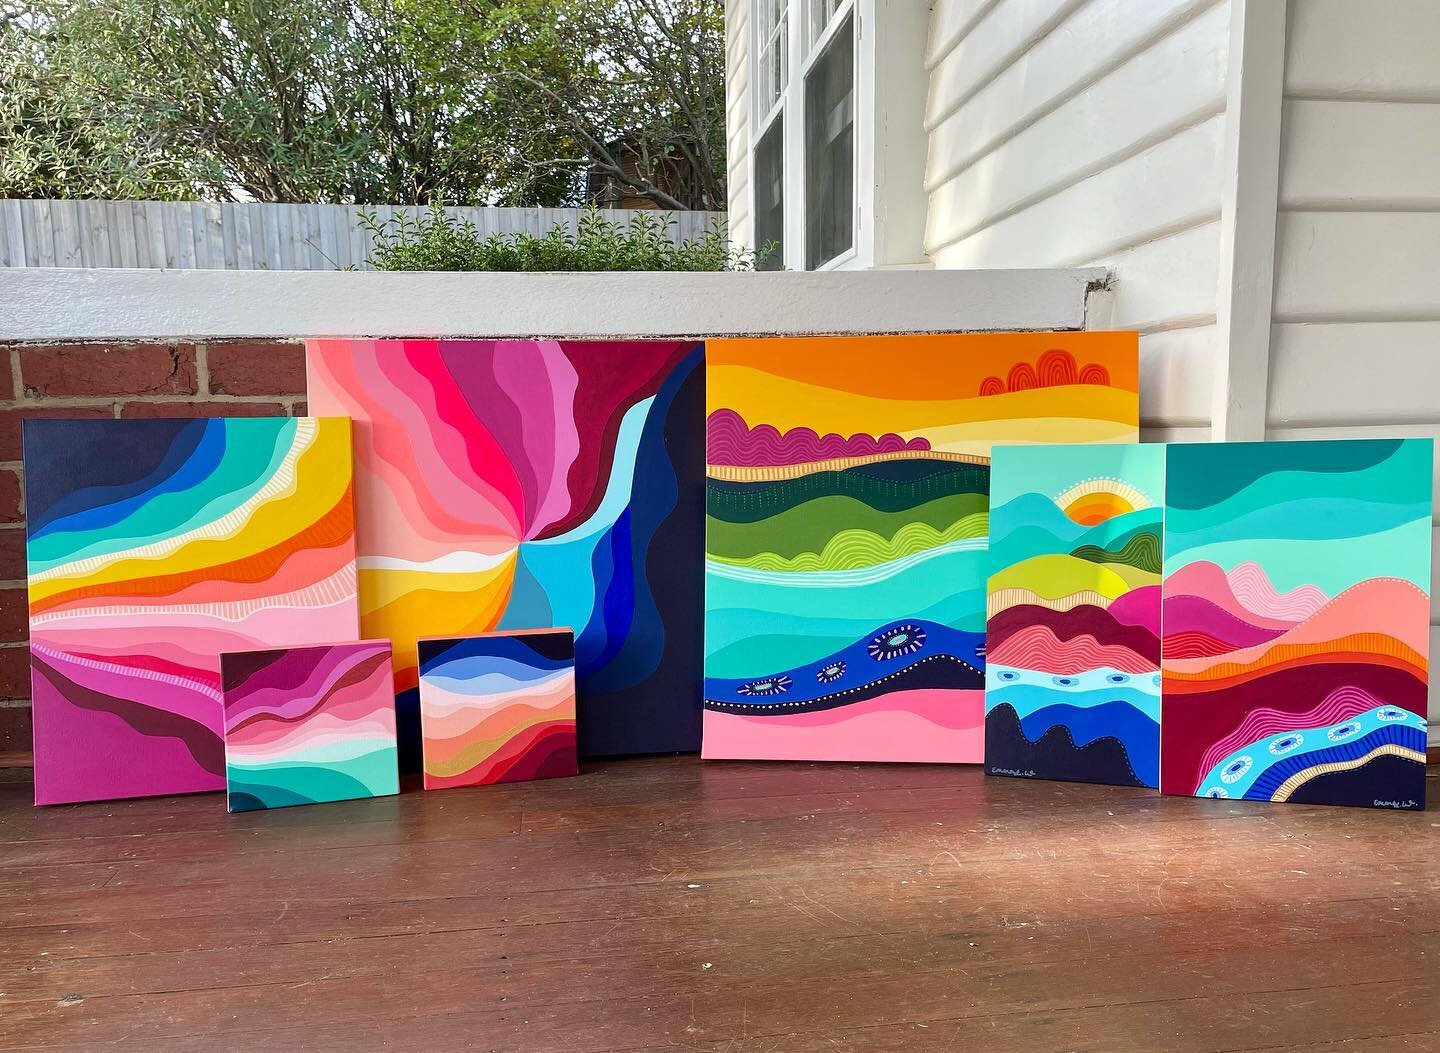 A colourful display of all my available works at the moment 💖🌈. Really enjoying painting with this rainbow colour palette 🥰. Head over to my web for more info. 
Or you can Dm with any Enquiries 
Happy FRI-YAY! 🌞 
-
-
-
#emmawhitelaw #rainbowabstr